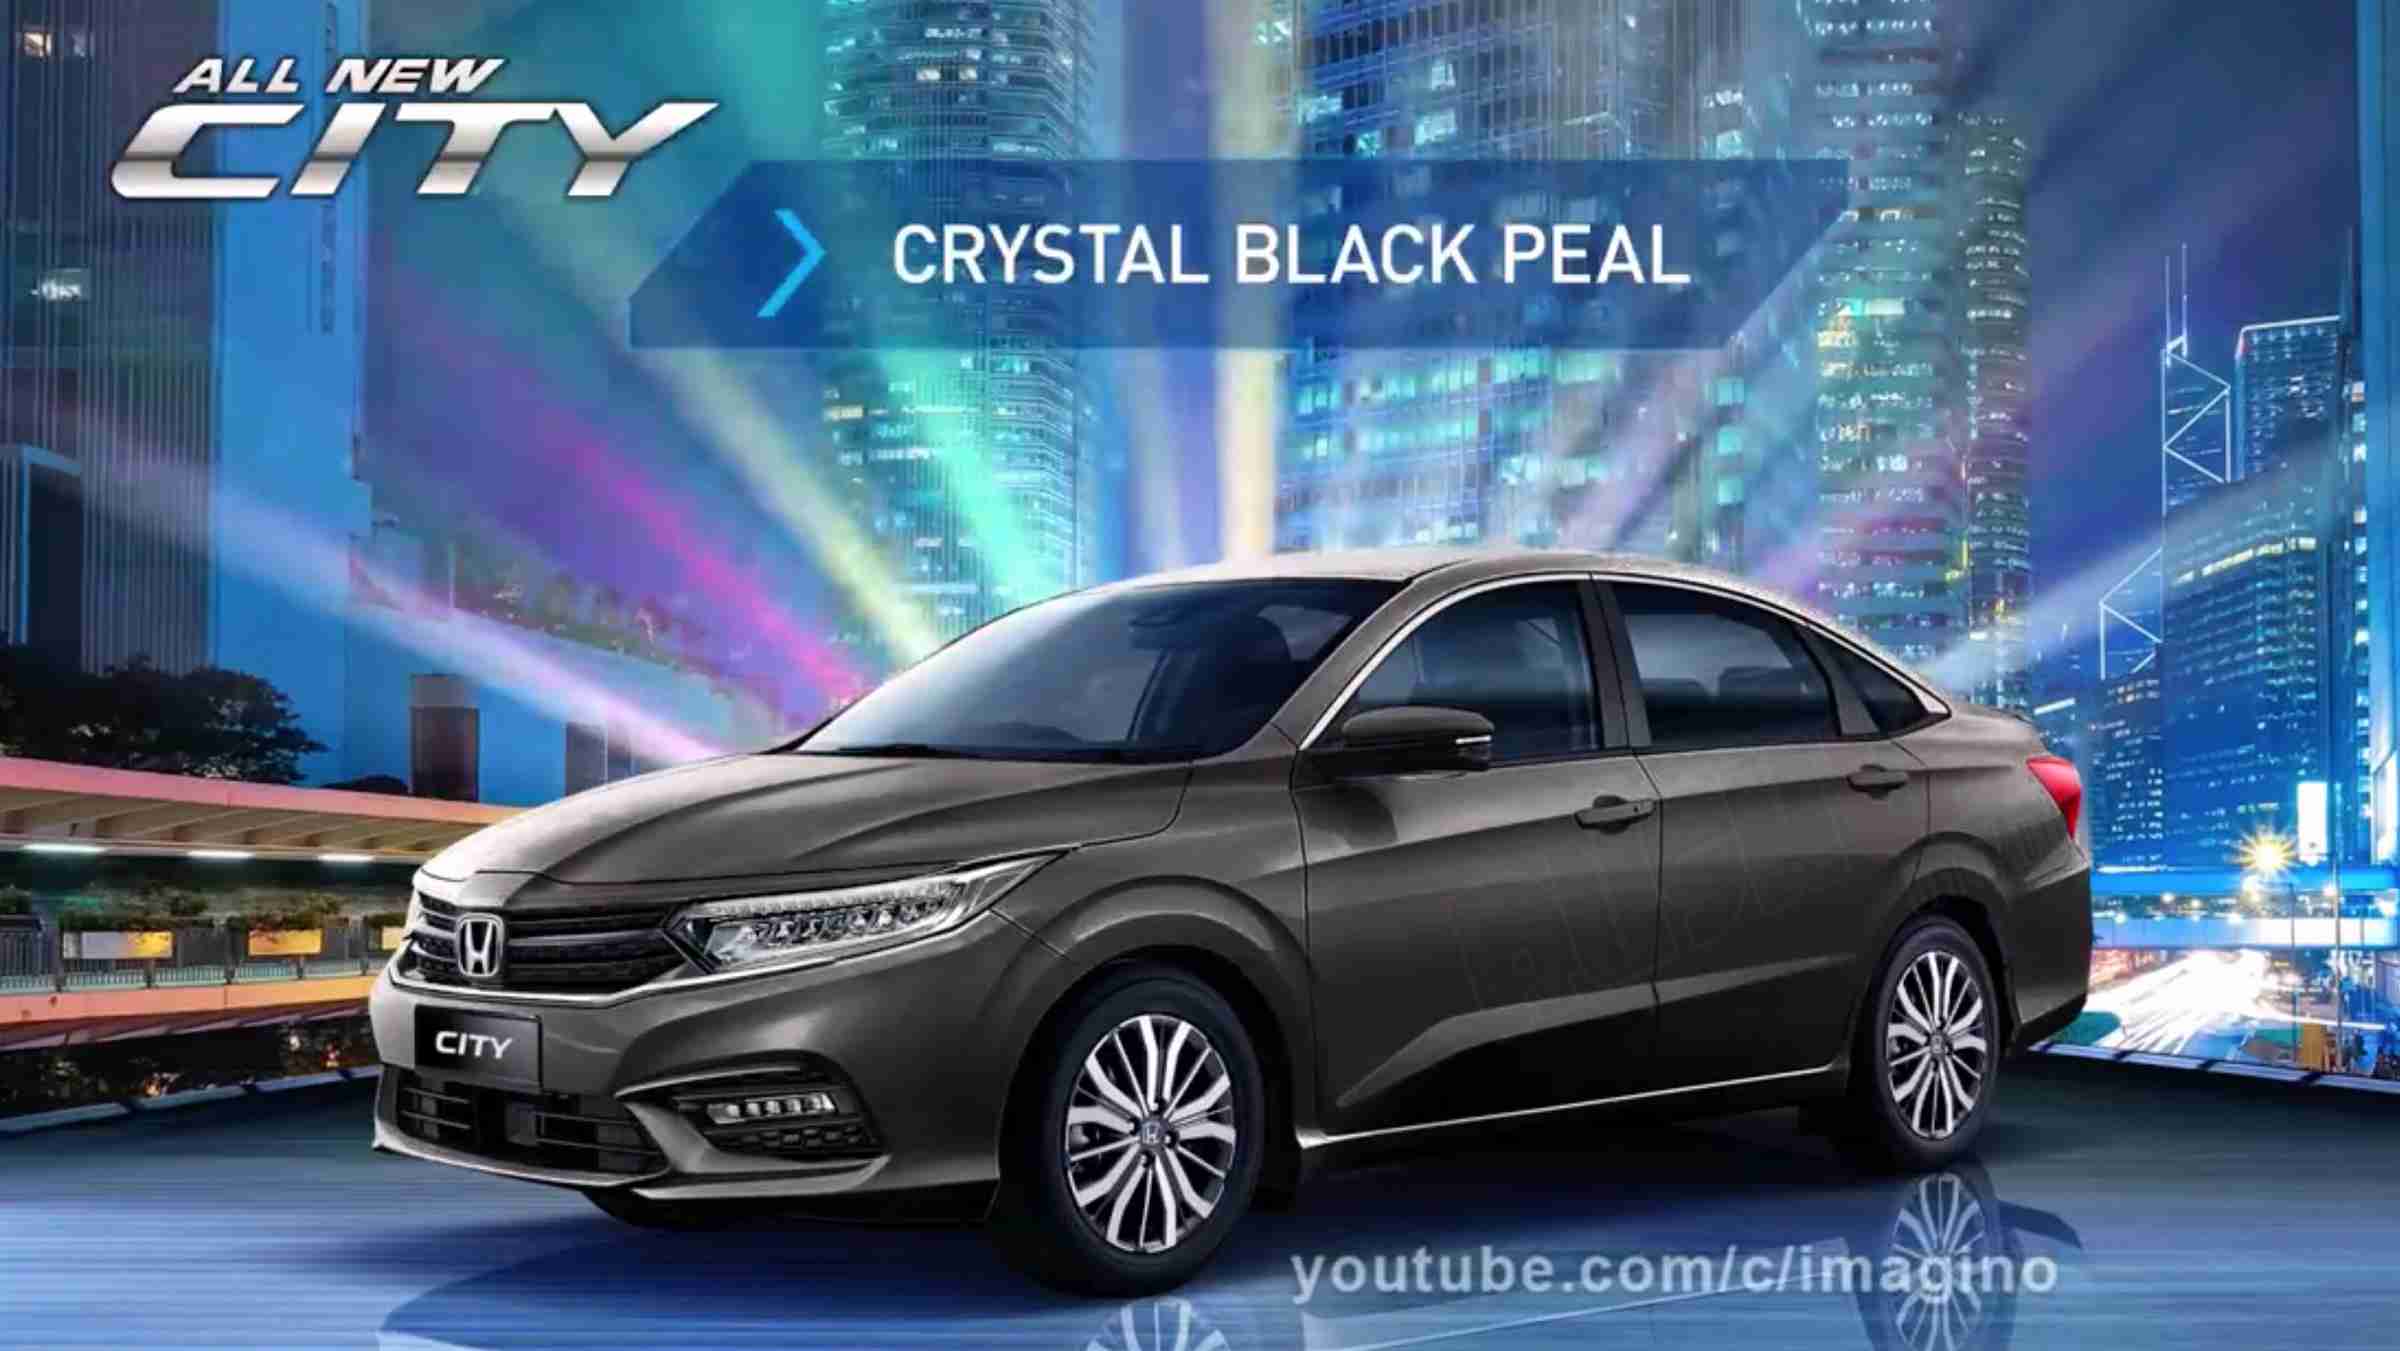 2020 Honda City front and rear design, multiple colours render - Video